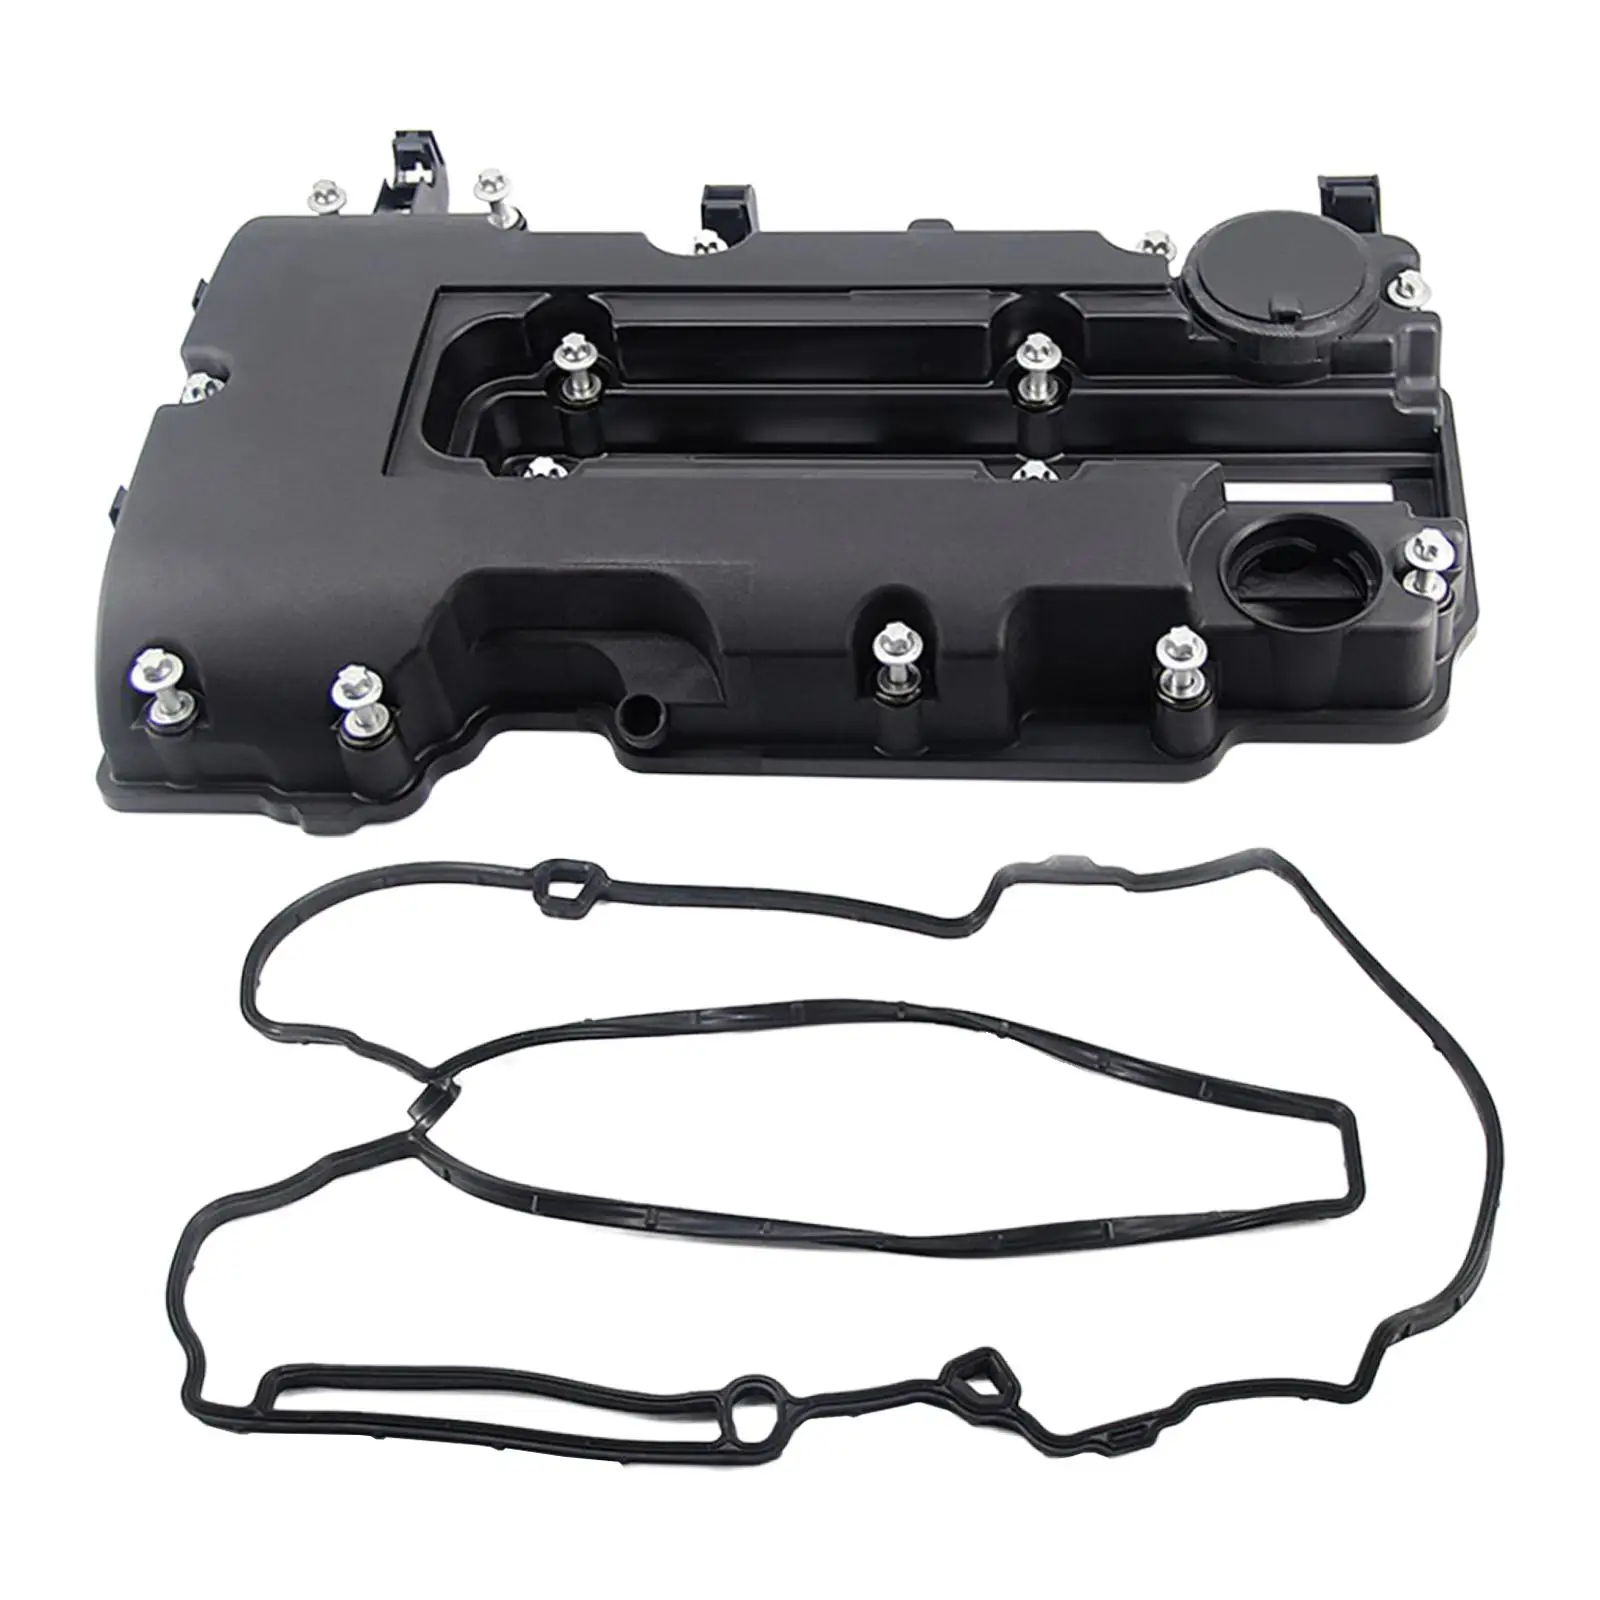 Camshaft Engine Cover W/ 73746 25198874 2519849 for Replace Accessory